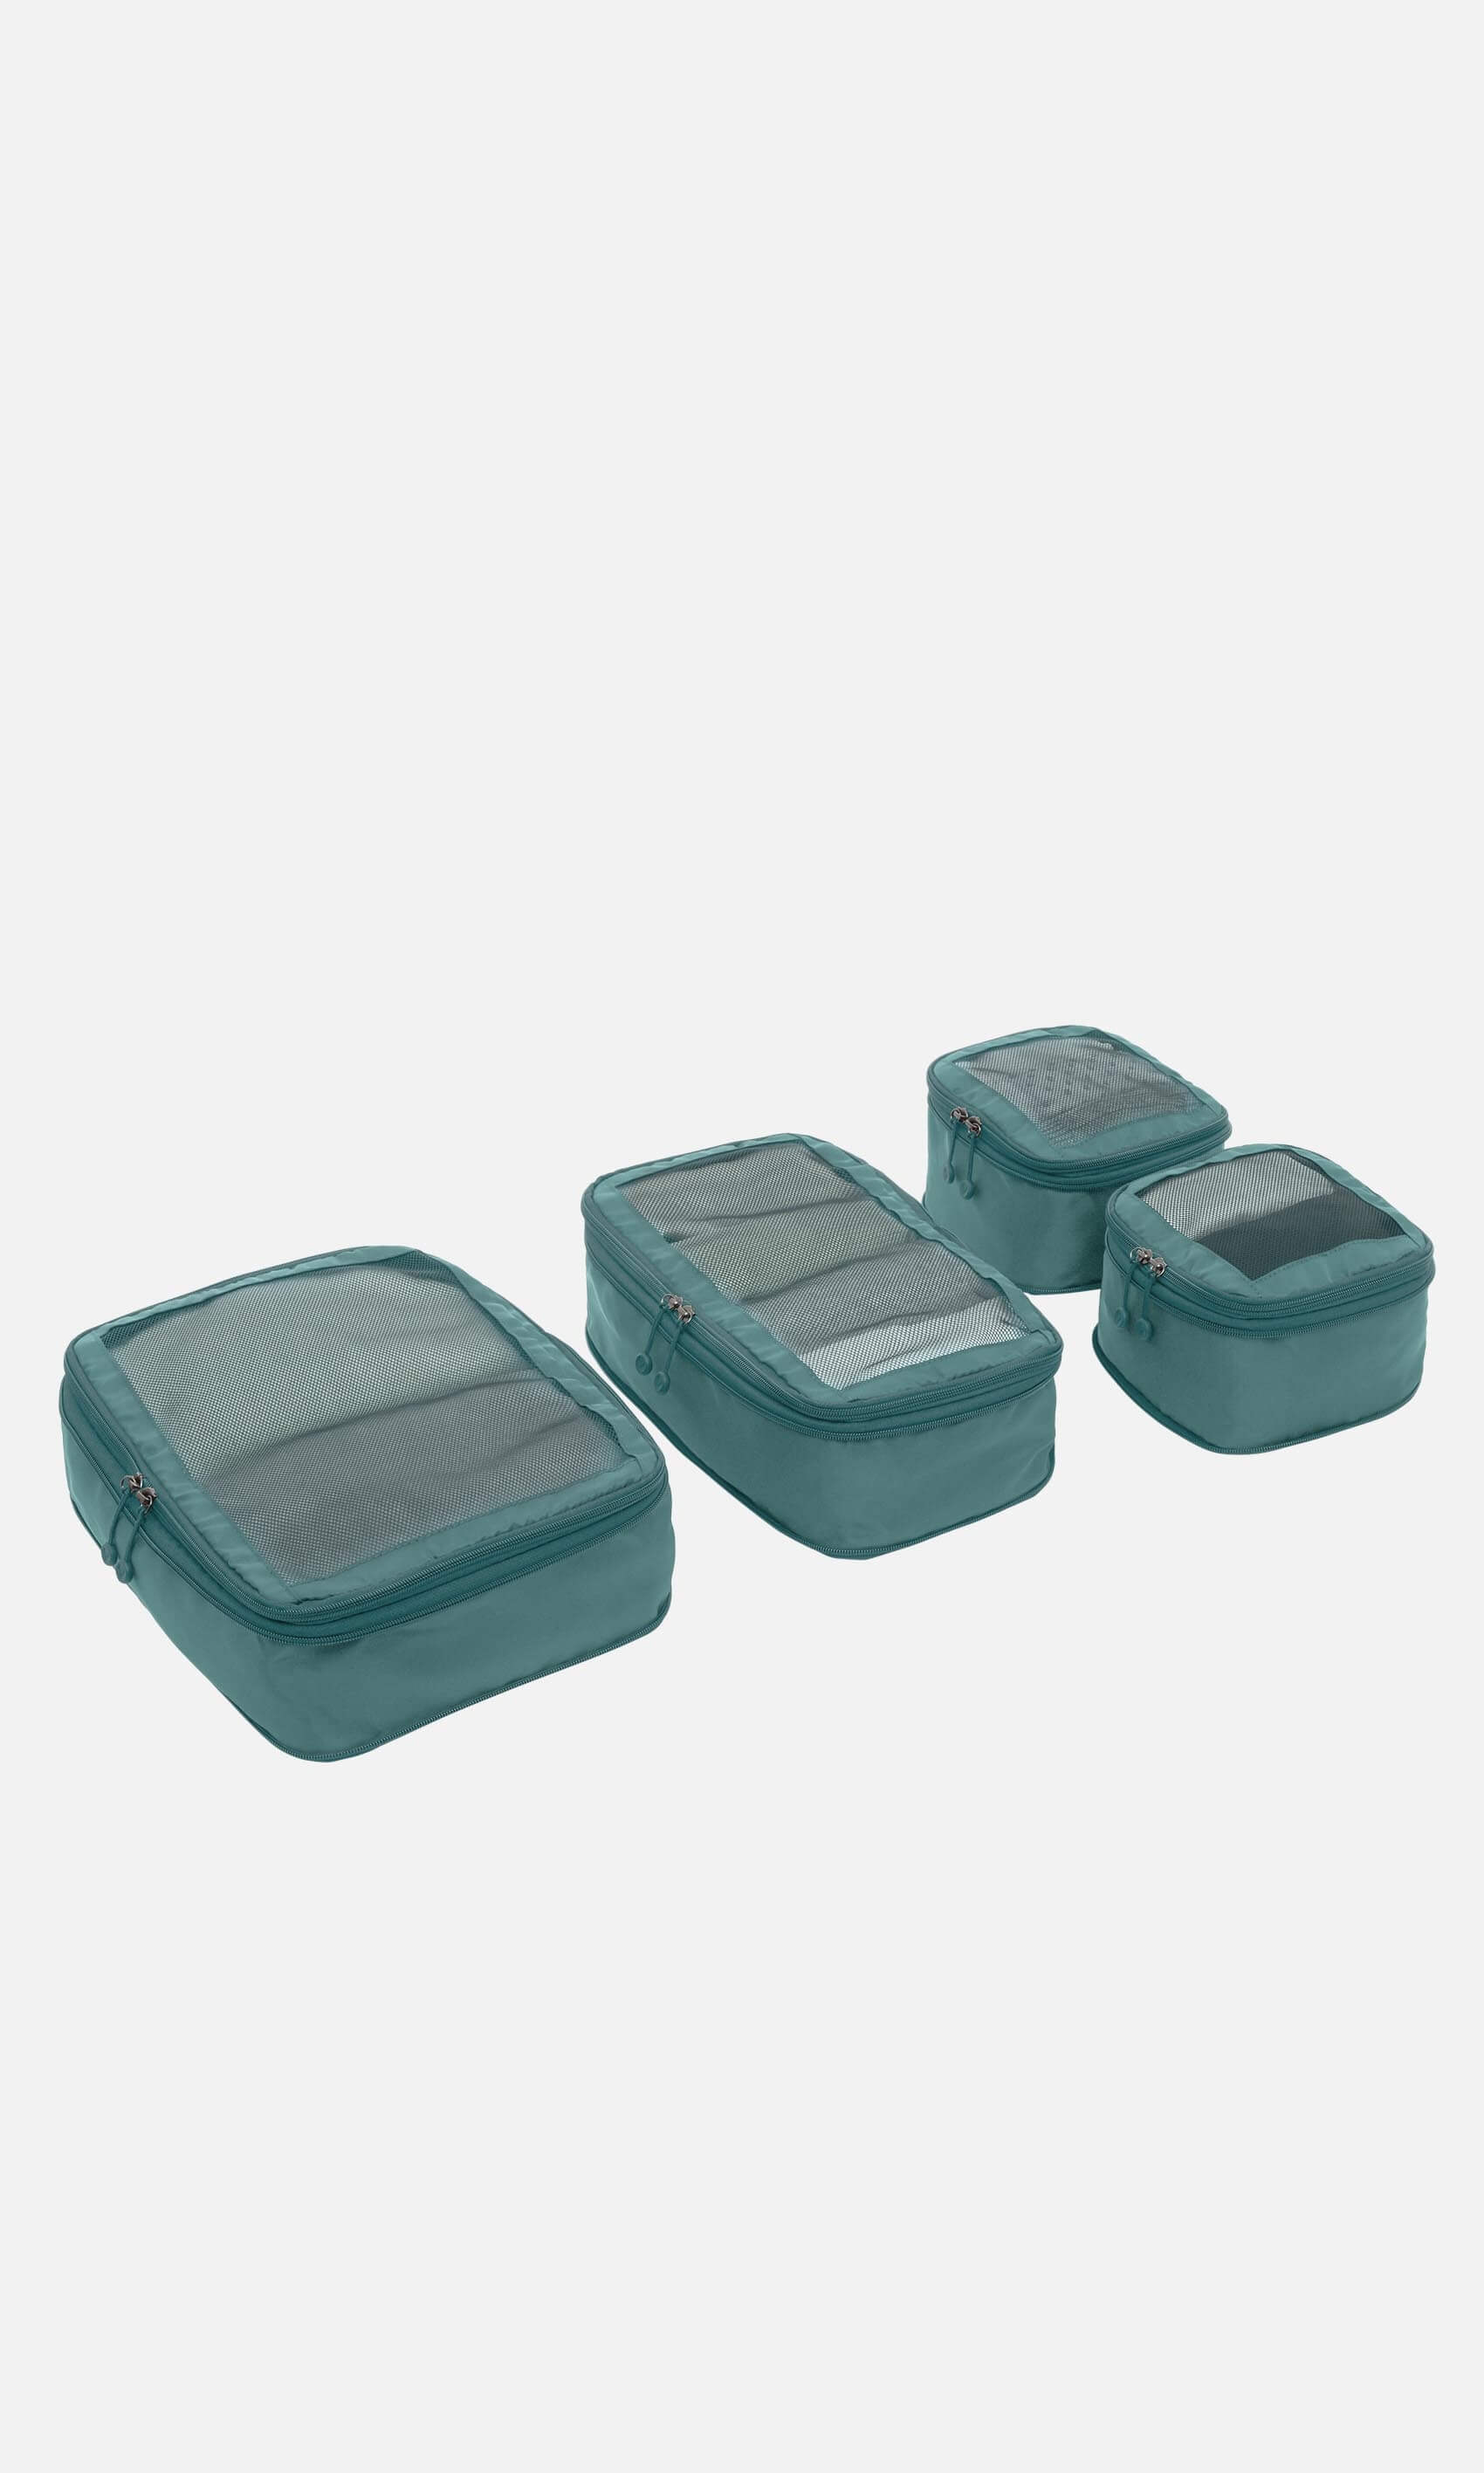 Antler Luggage -  Chelsea 4 packing cubes in mineral - Accessories Chelsea 4 Packing Cubes Mineral (Blue) | Travel Accessories | Antler UK